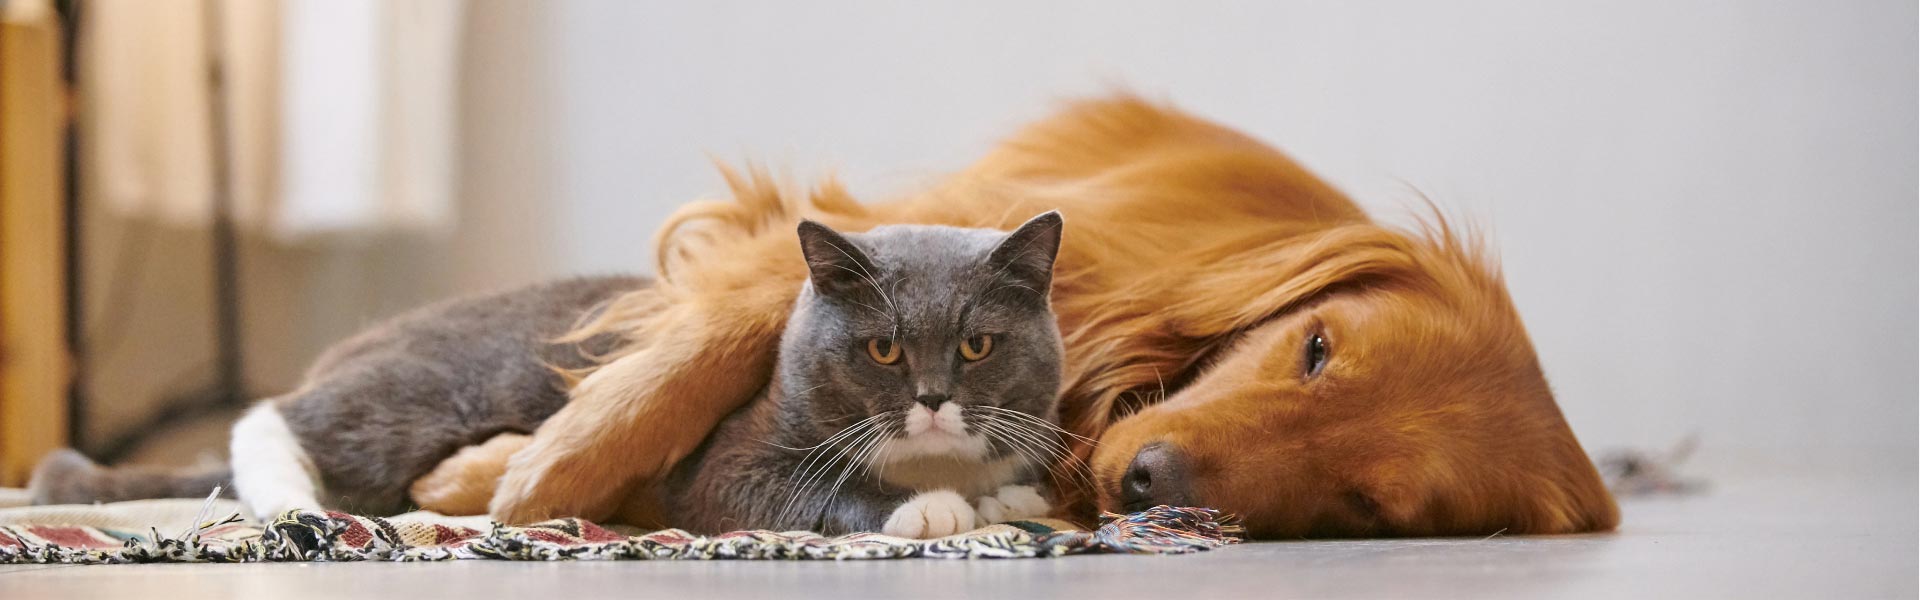 A grey and white cat laying together with a brown dog on the floor